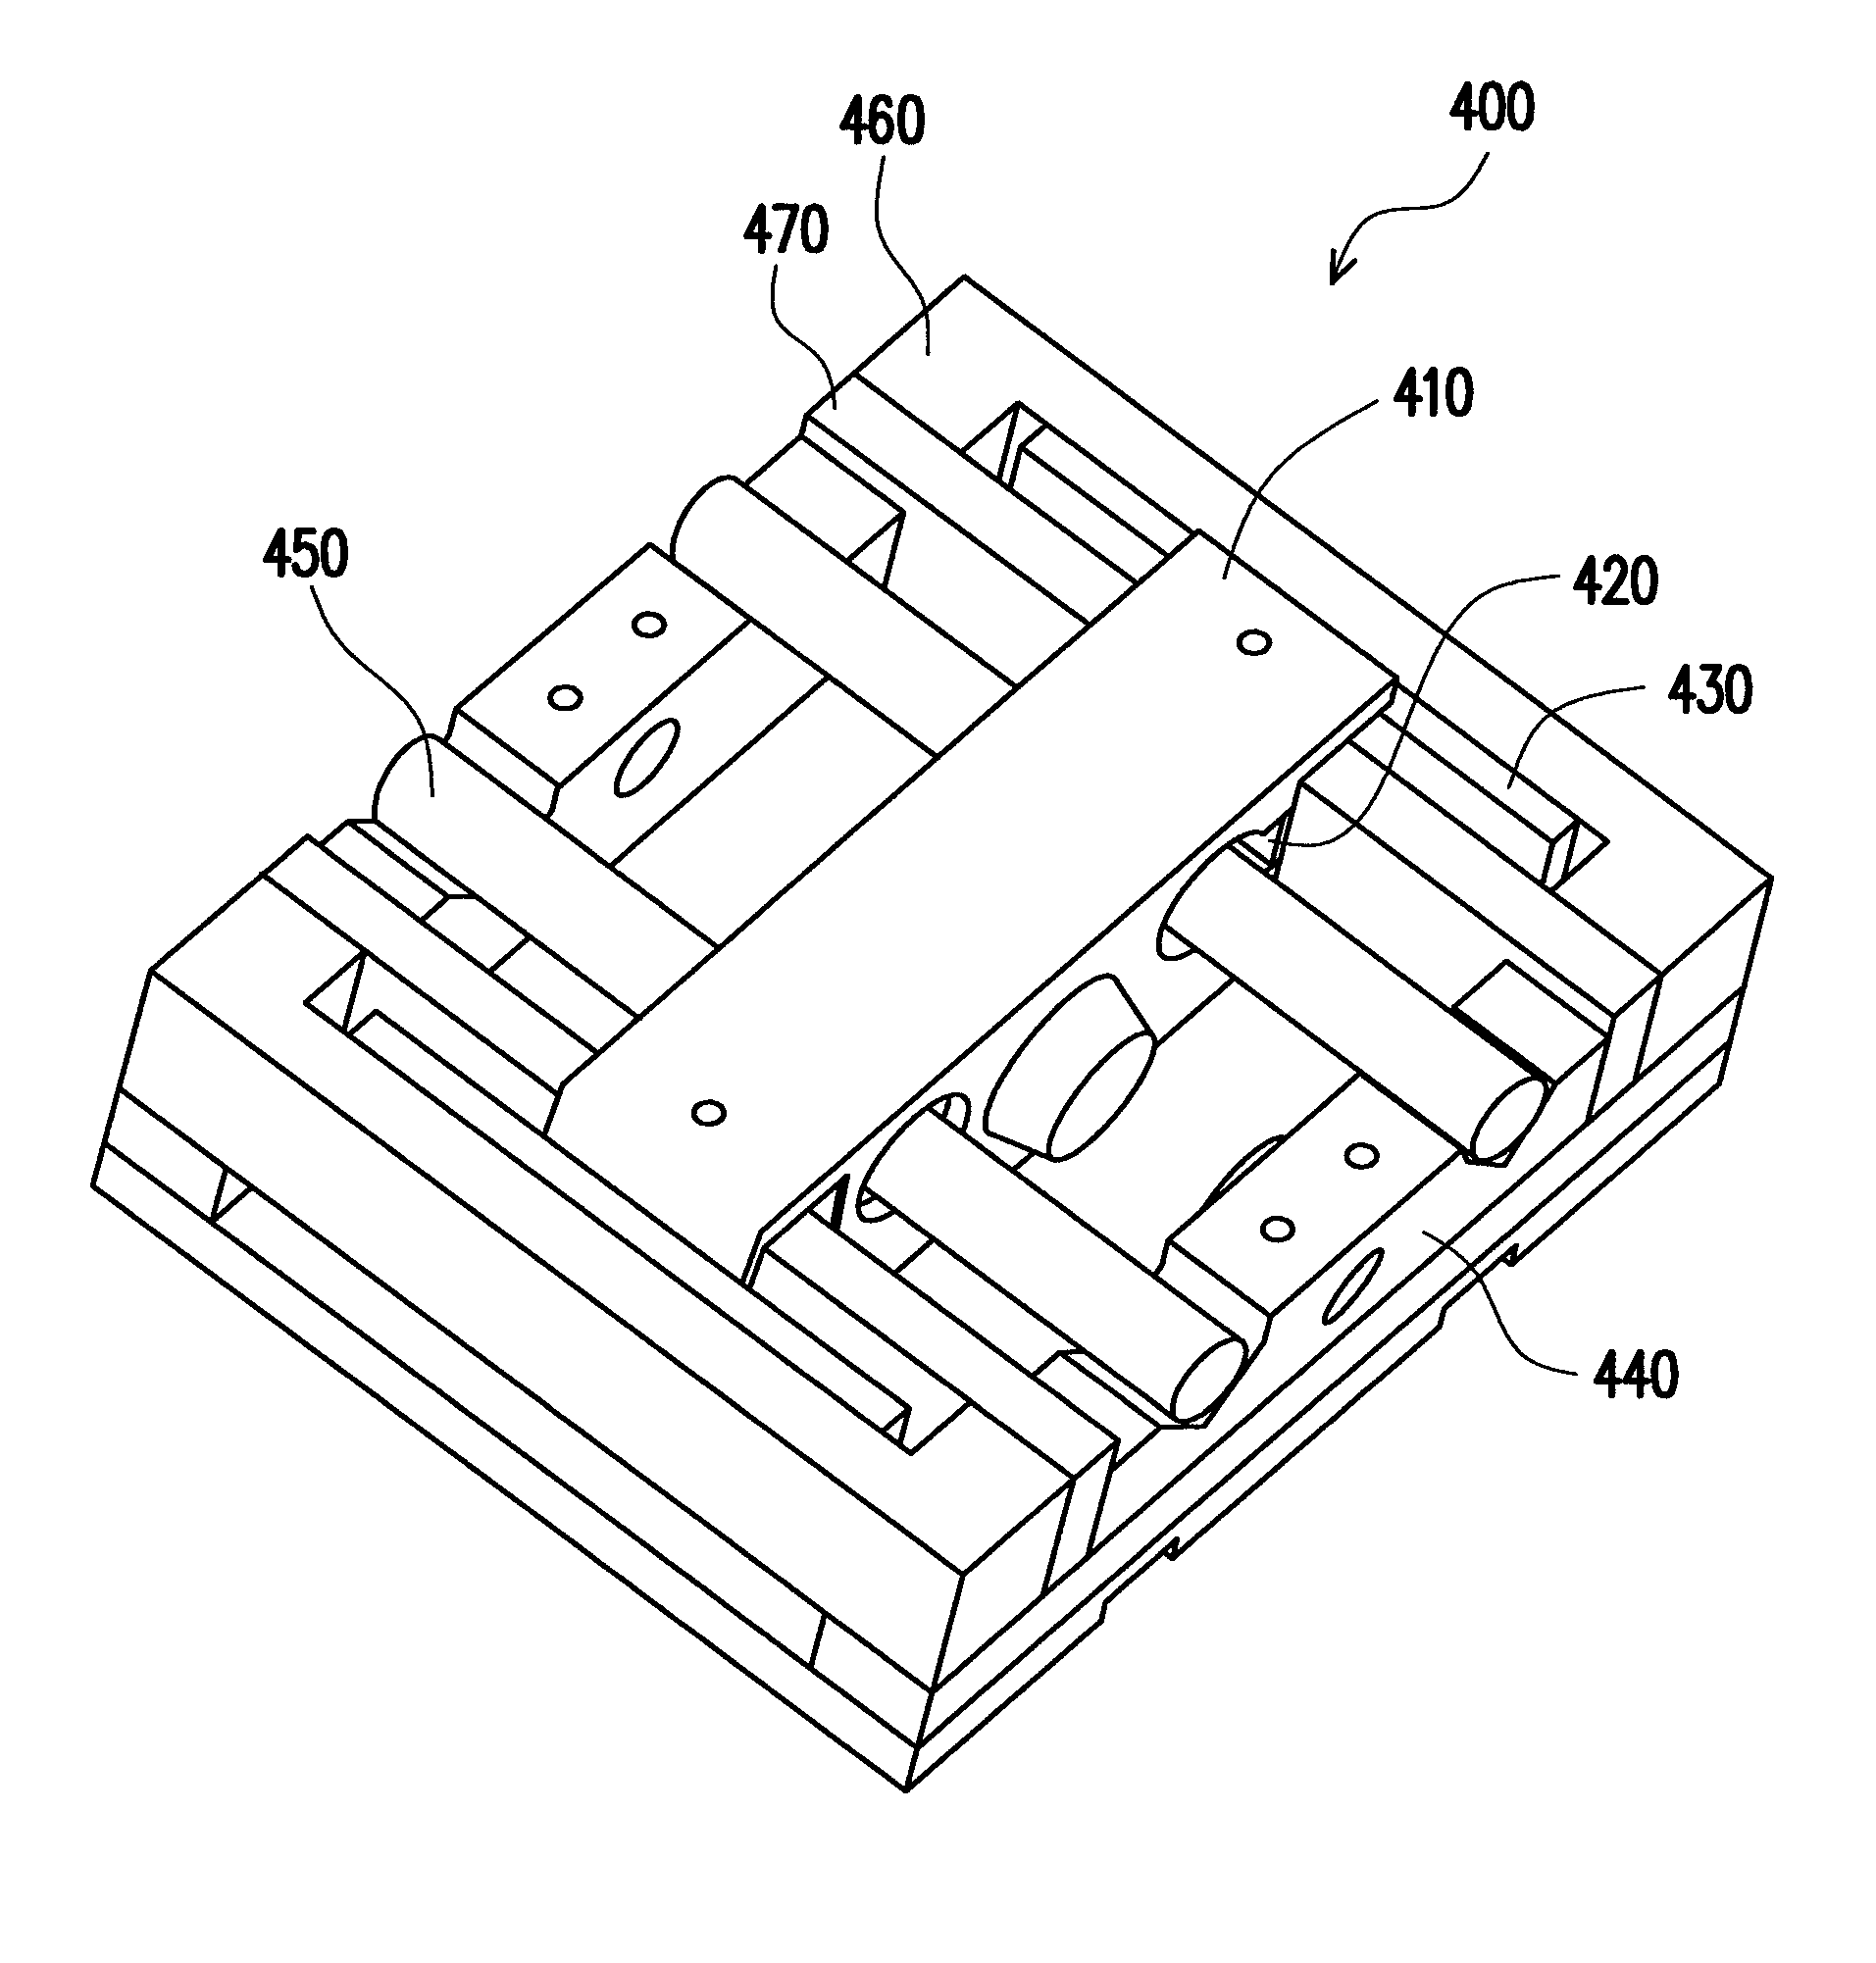 Impact force feedback device and interactive system using the same